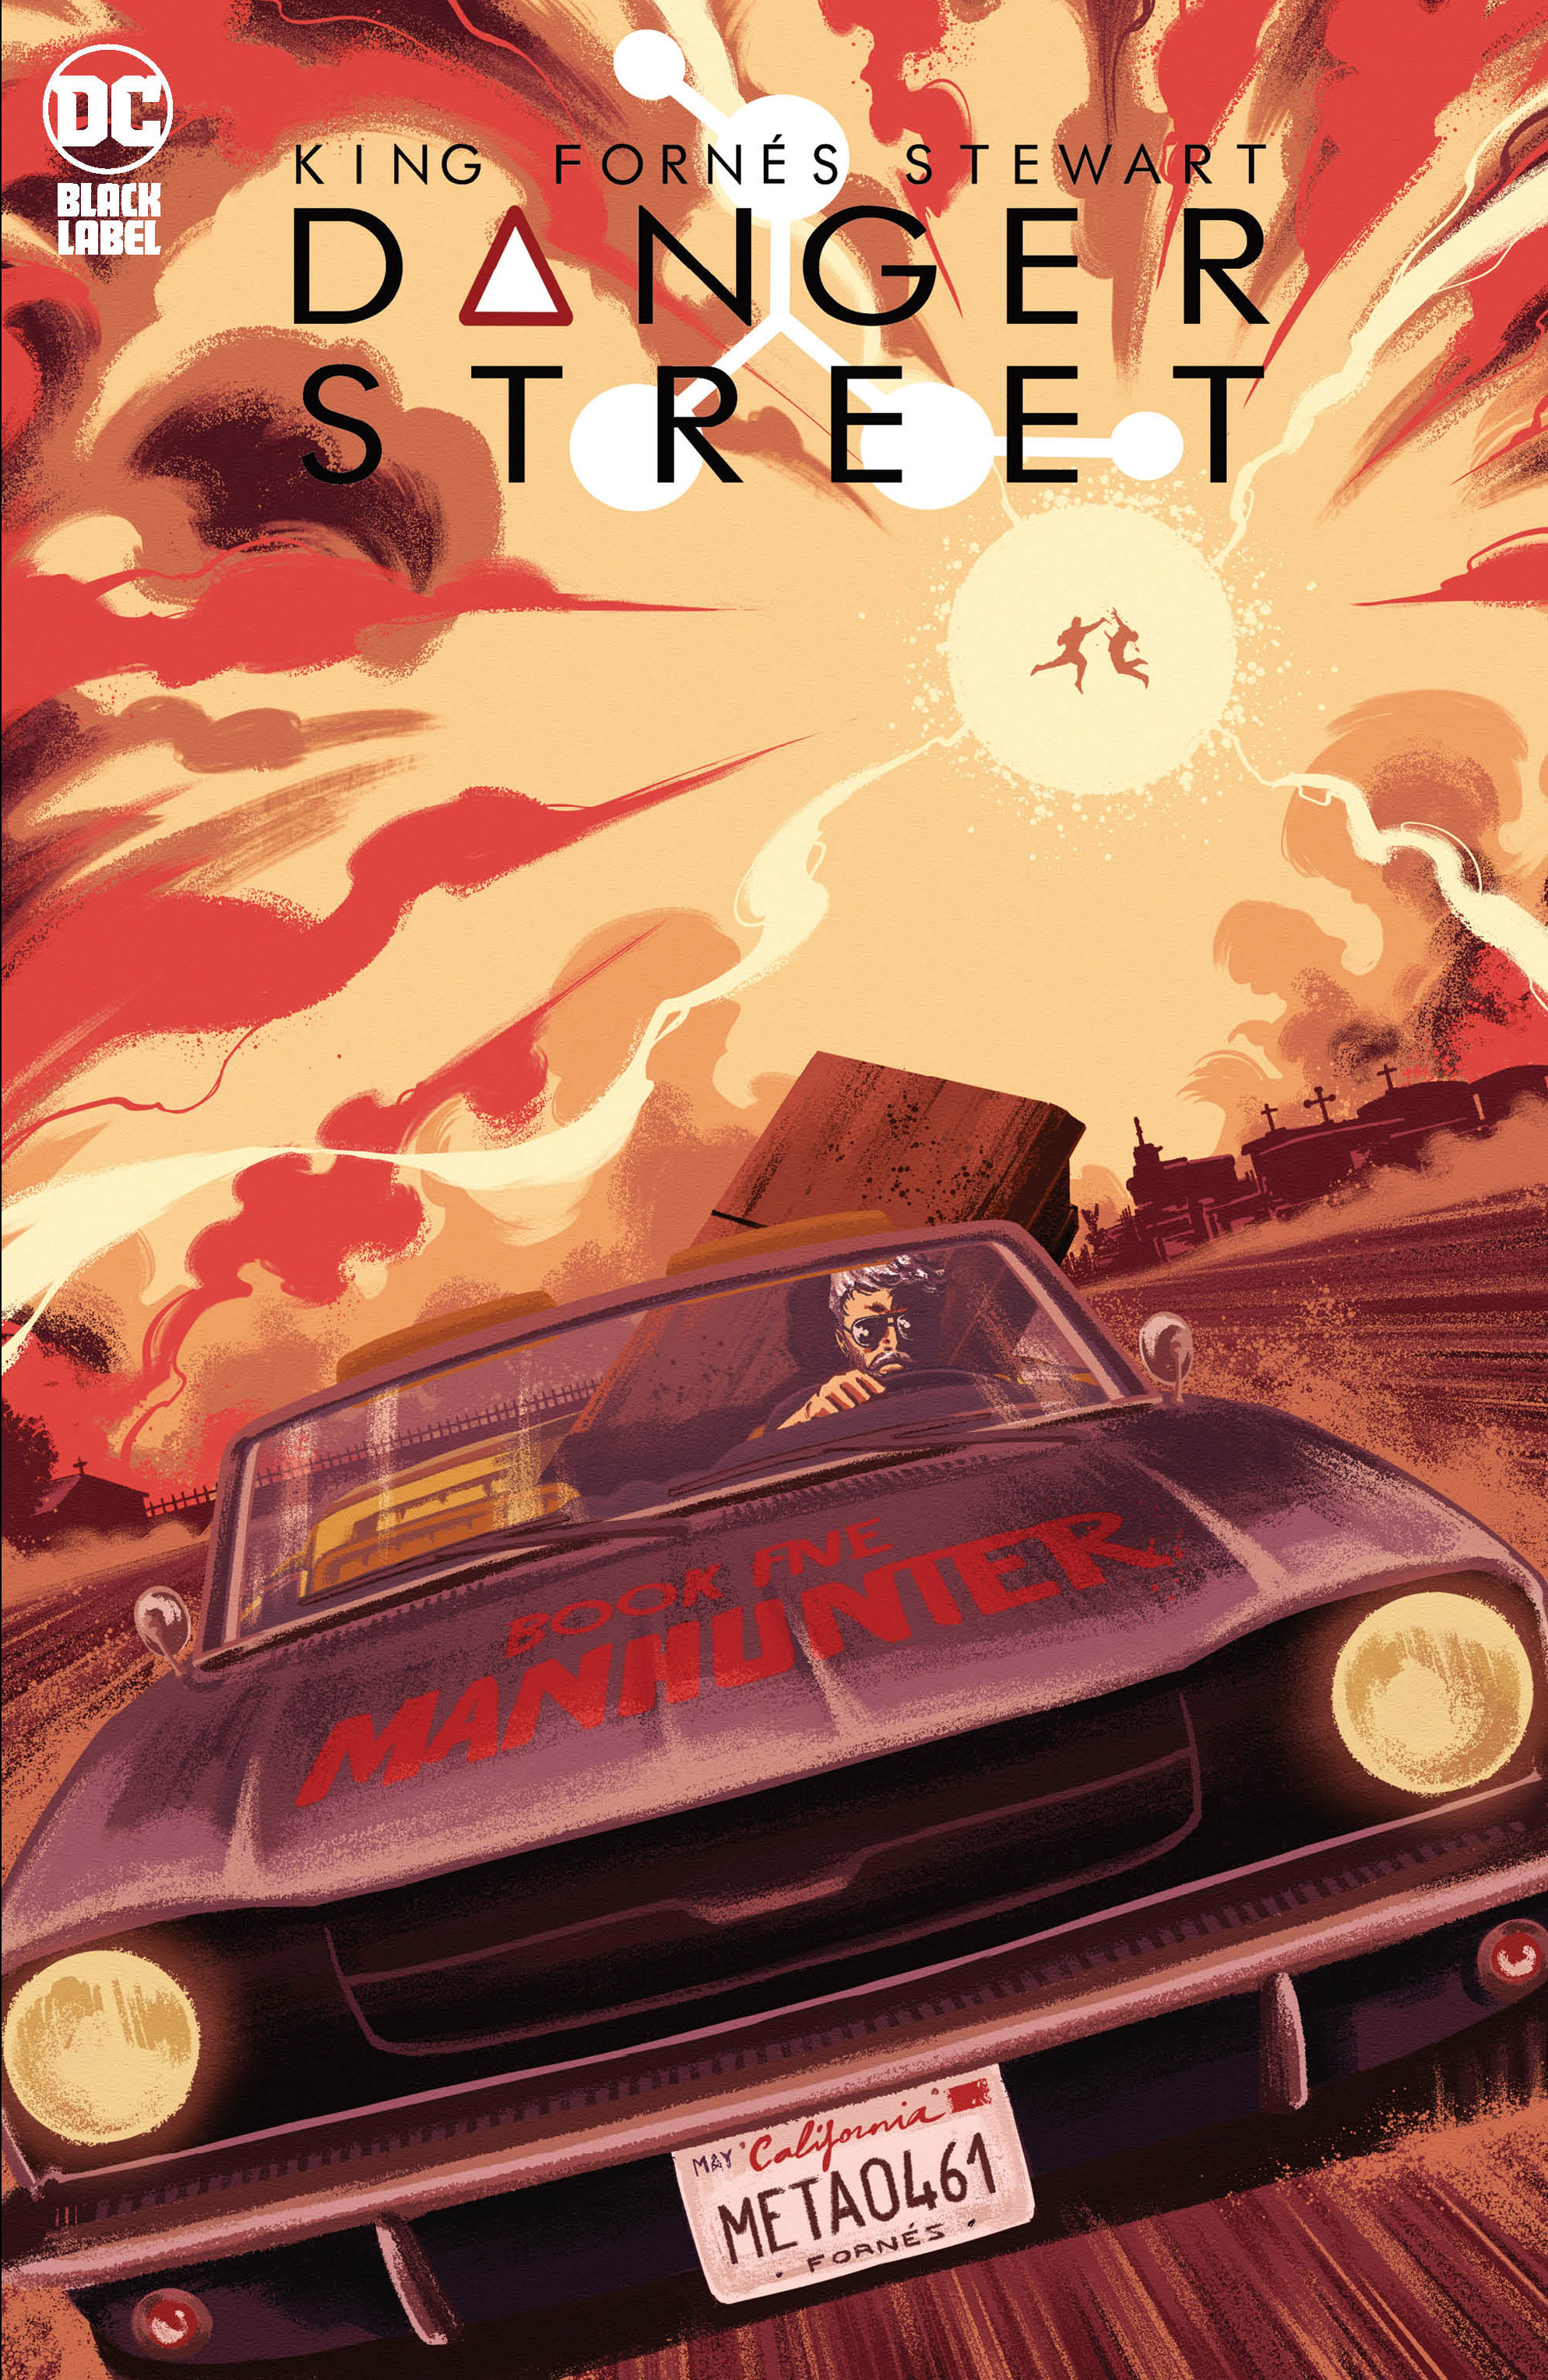 Danger Street #5 (Of 12) Cover A Jorge Fornes (Mature)